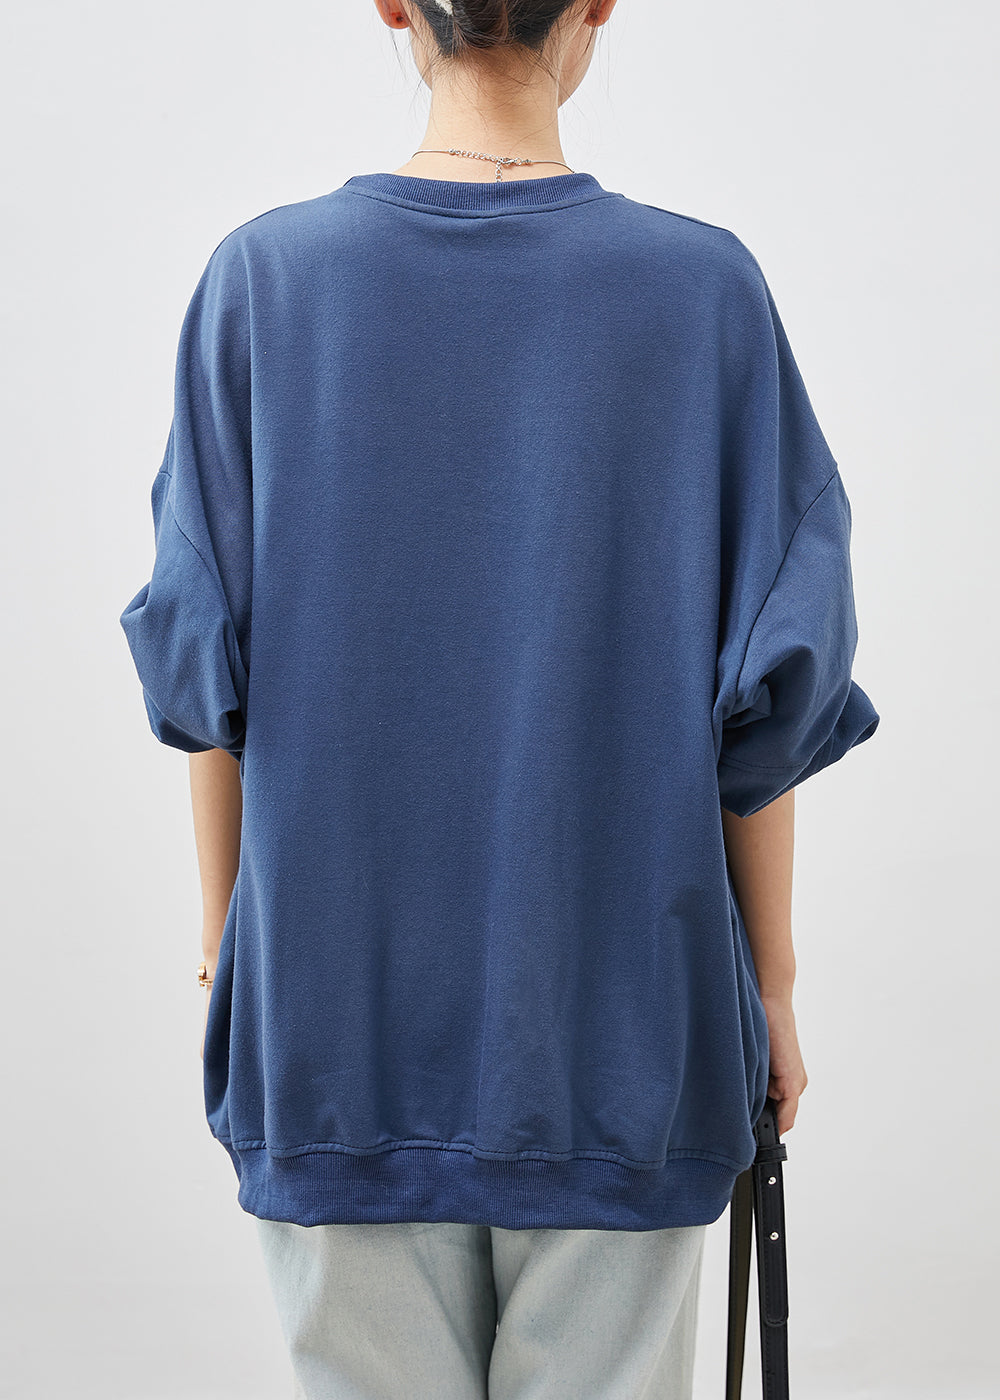 Women Blue Embroideried Oversized Cotton Pullover Streetwear Spring